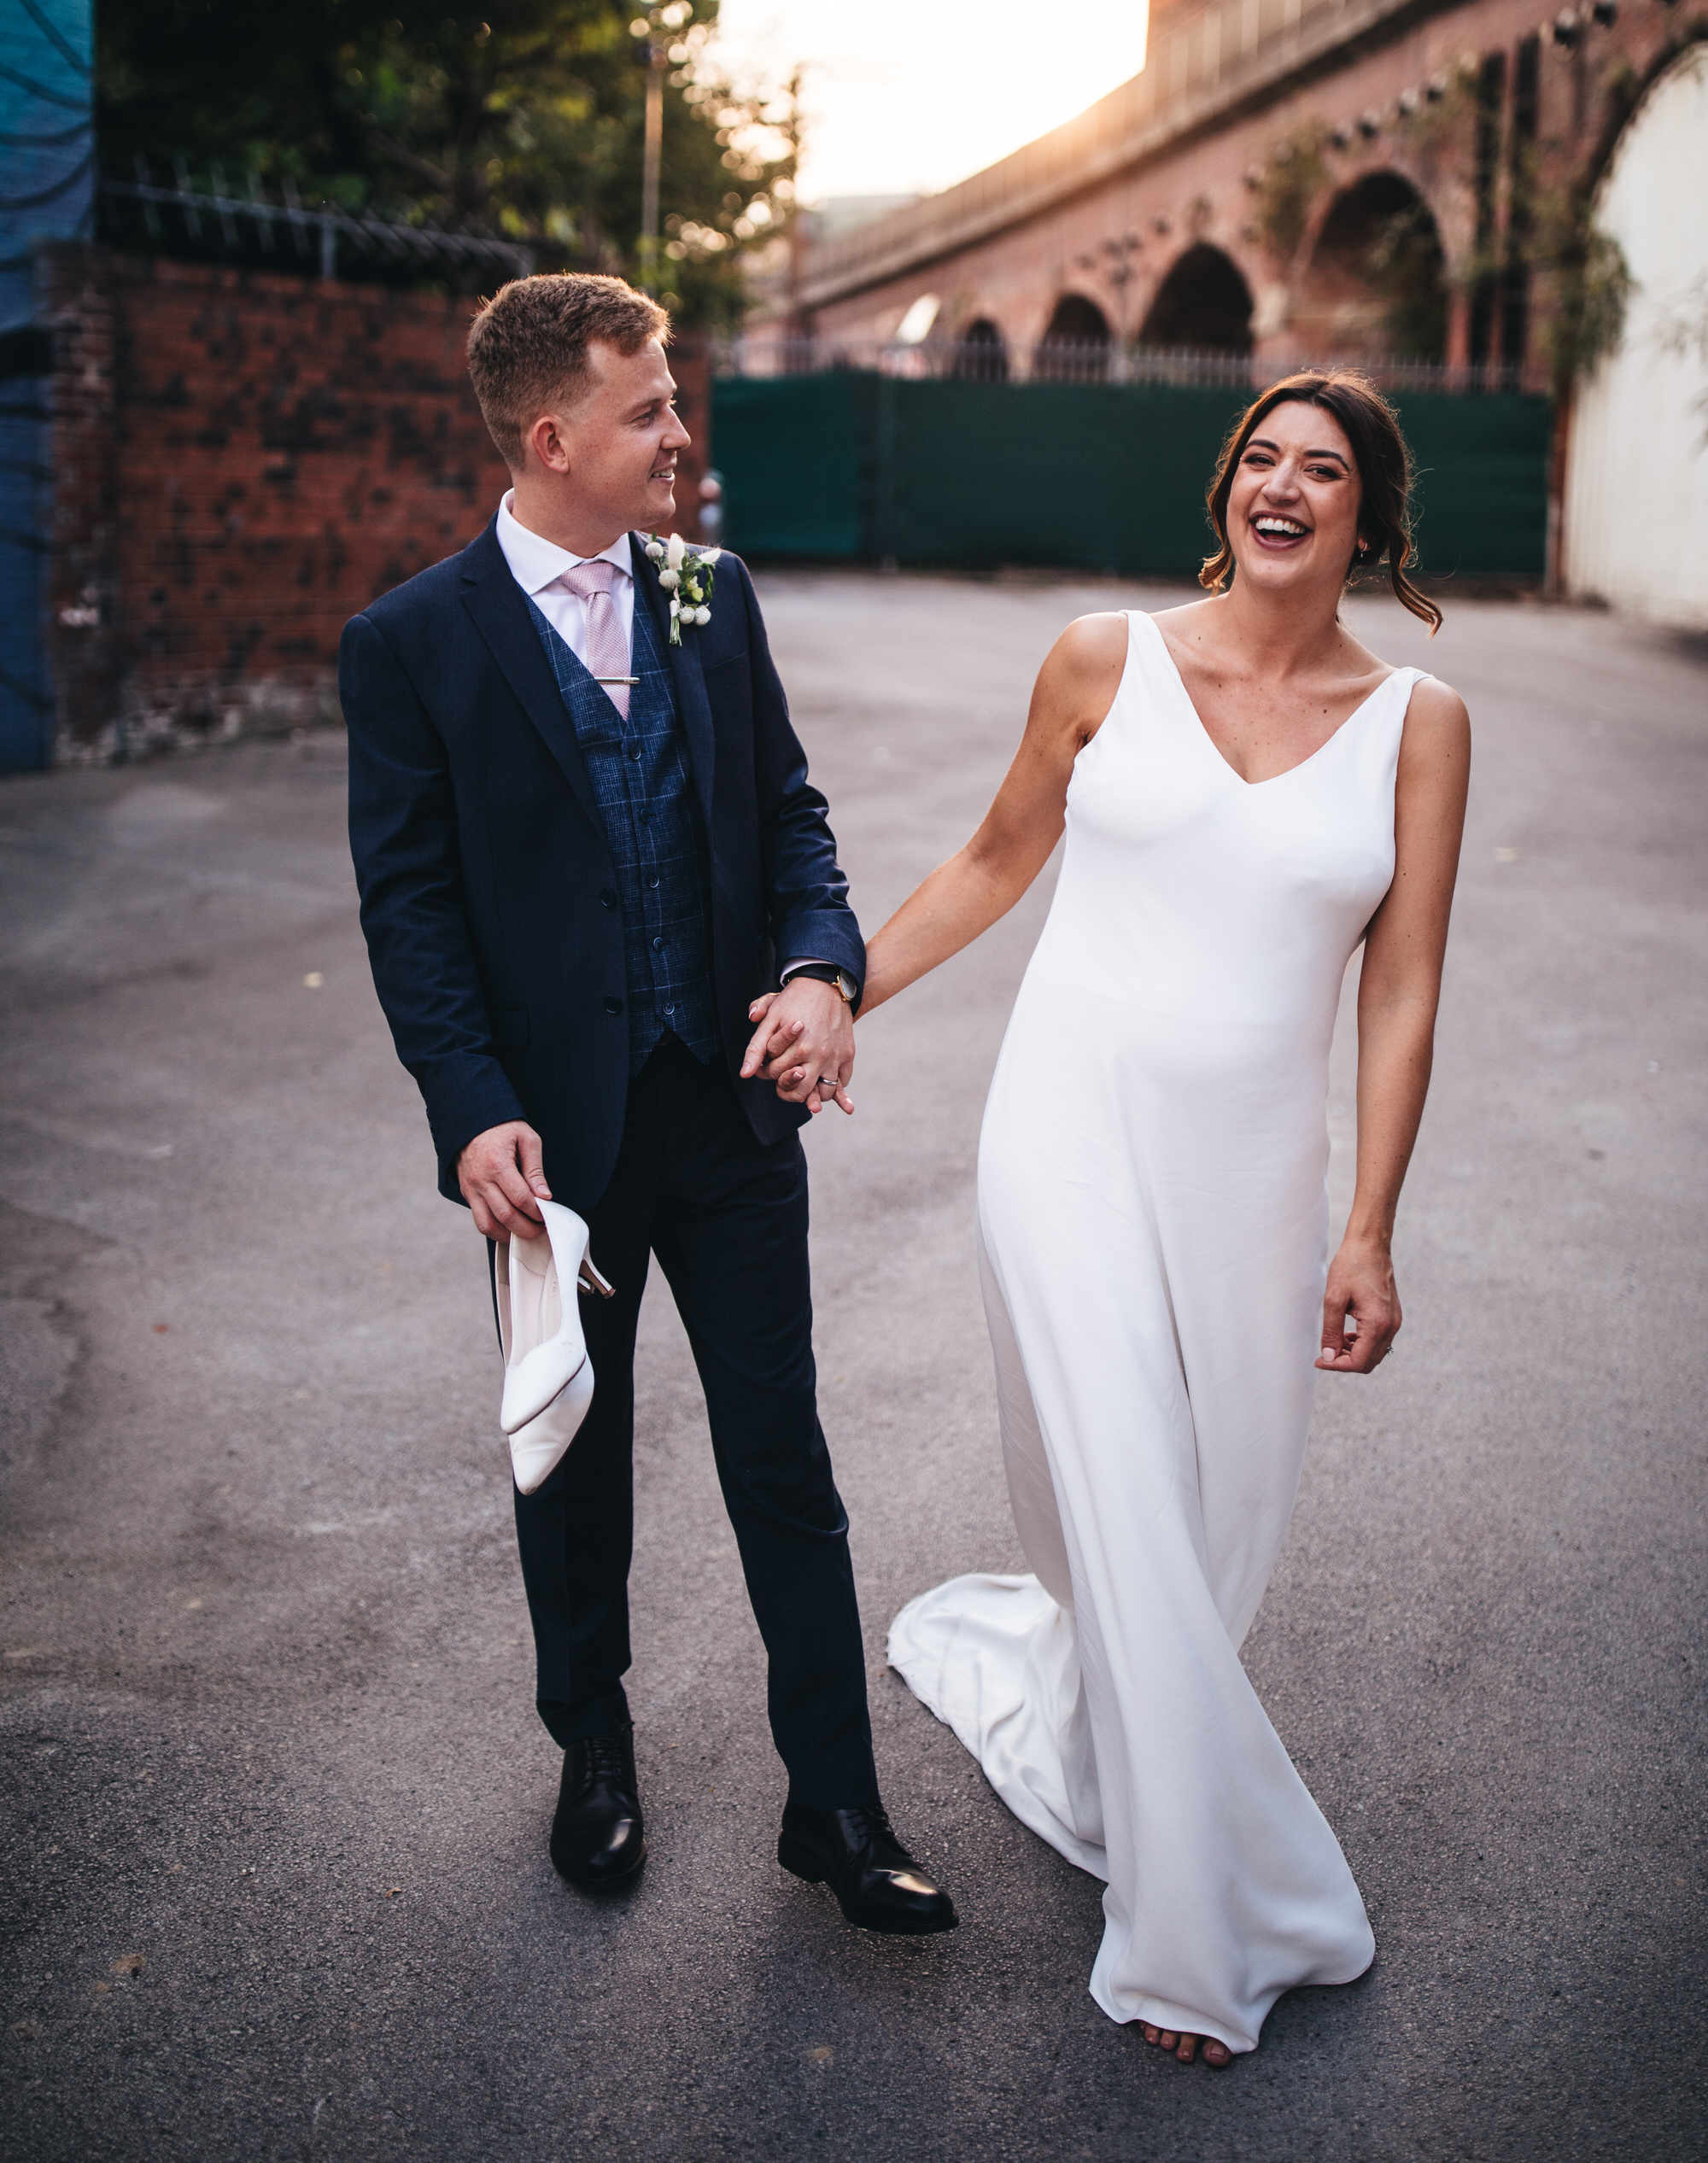 bride and groom holding hands laughing as groom carries bride's heeled shoes